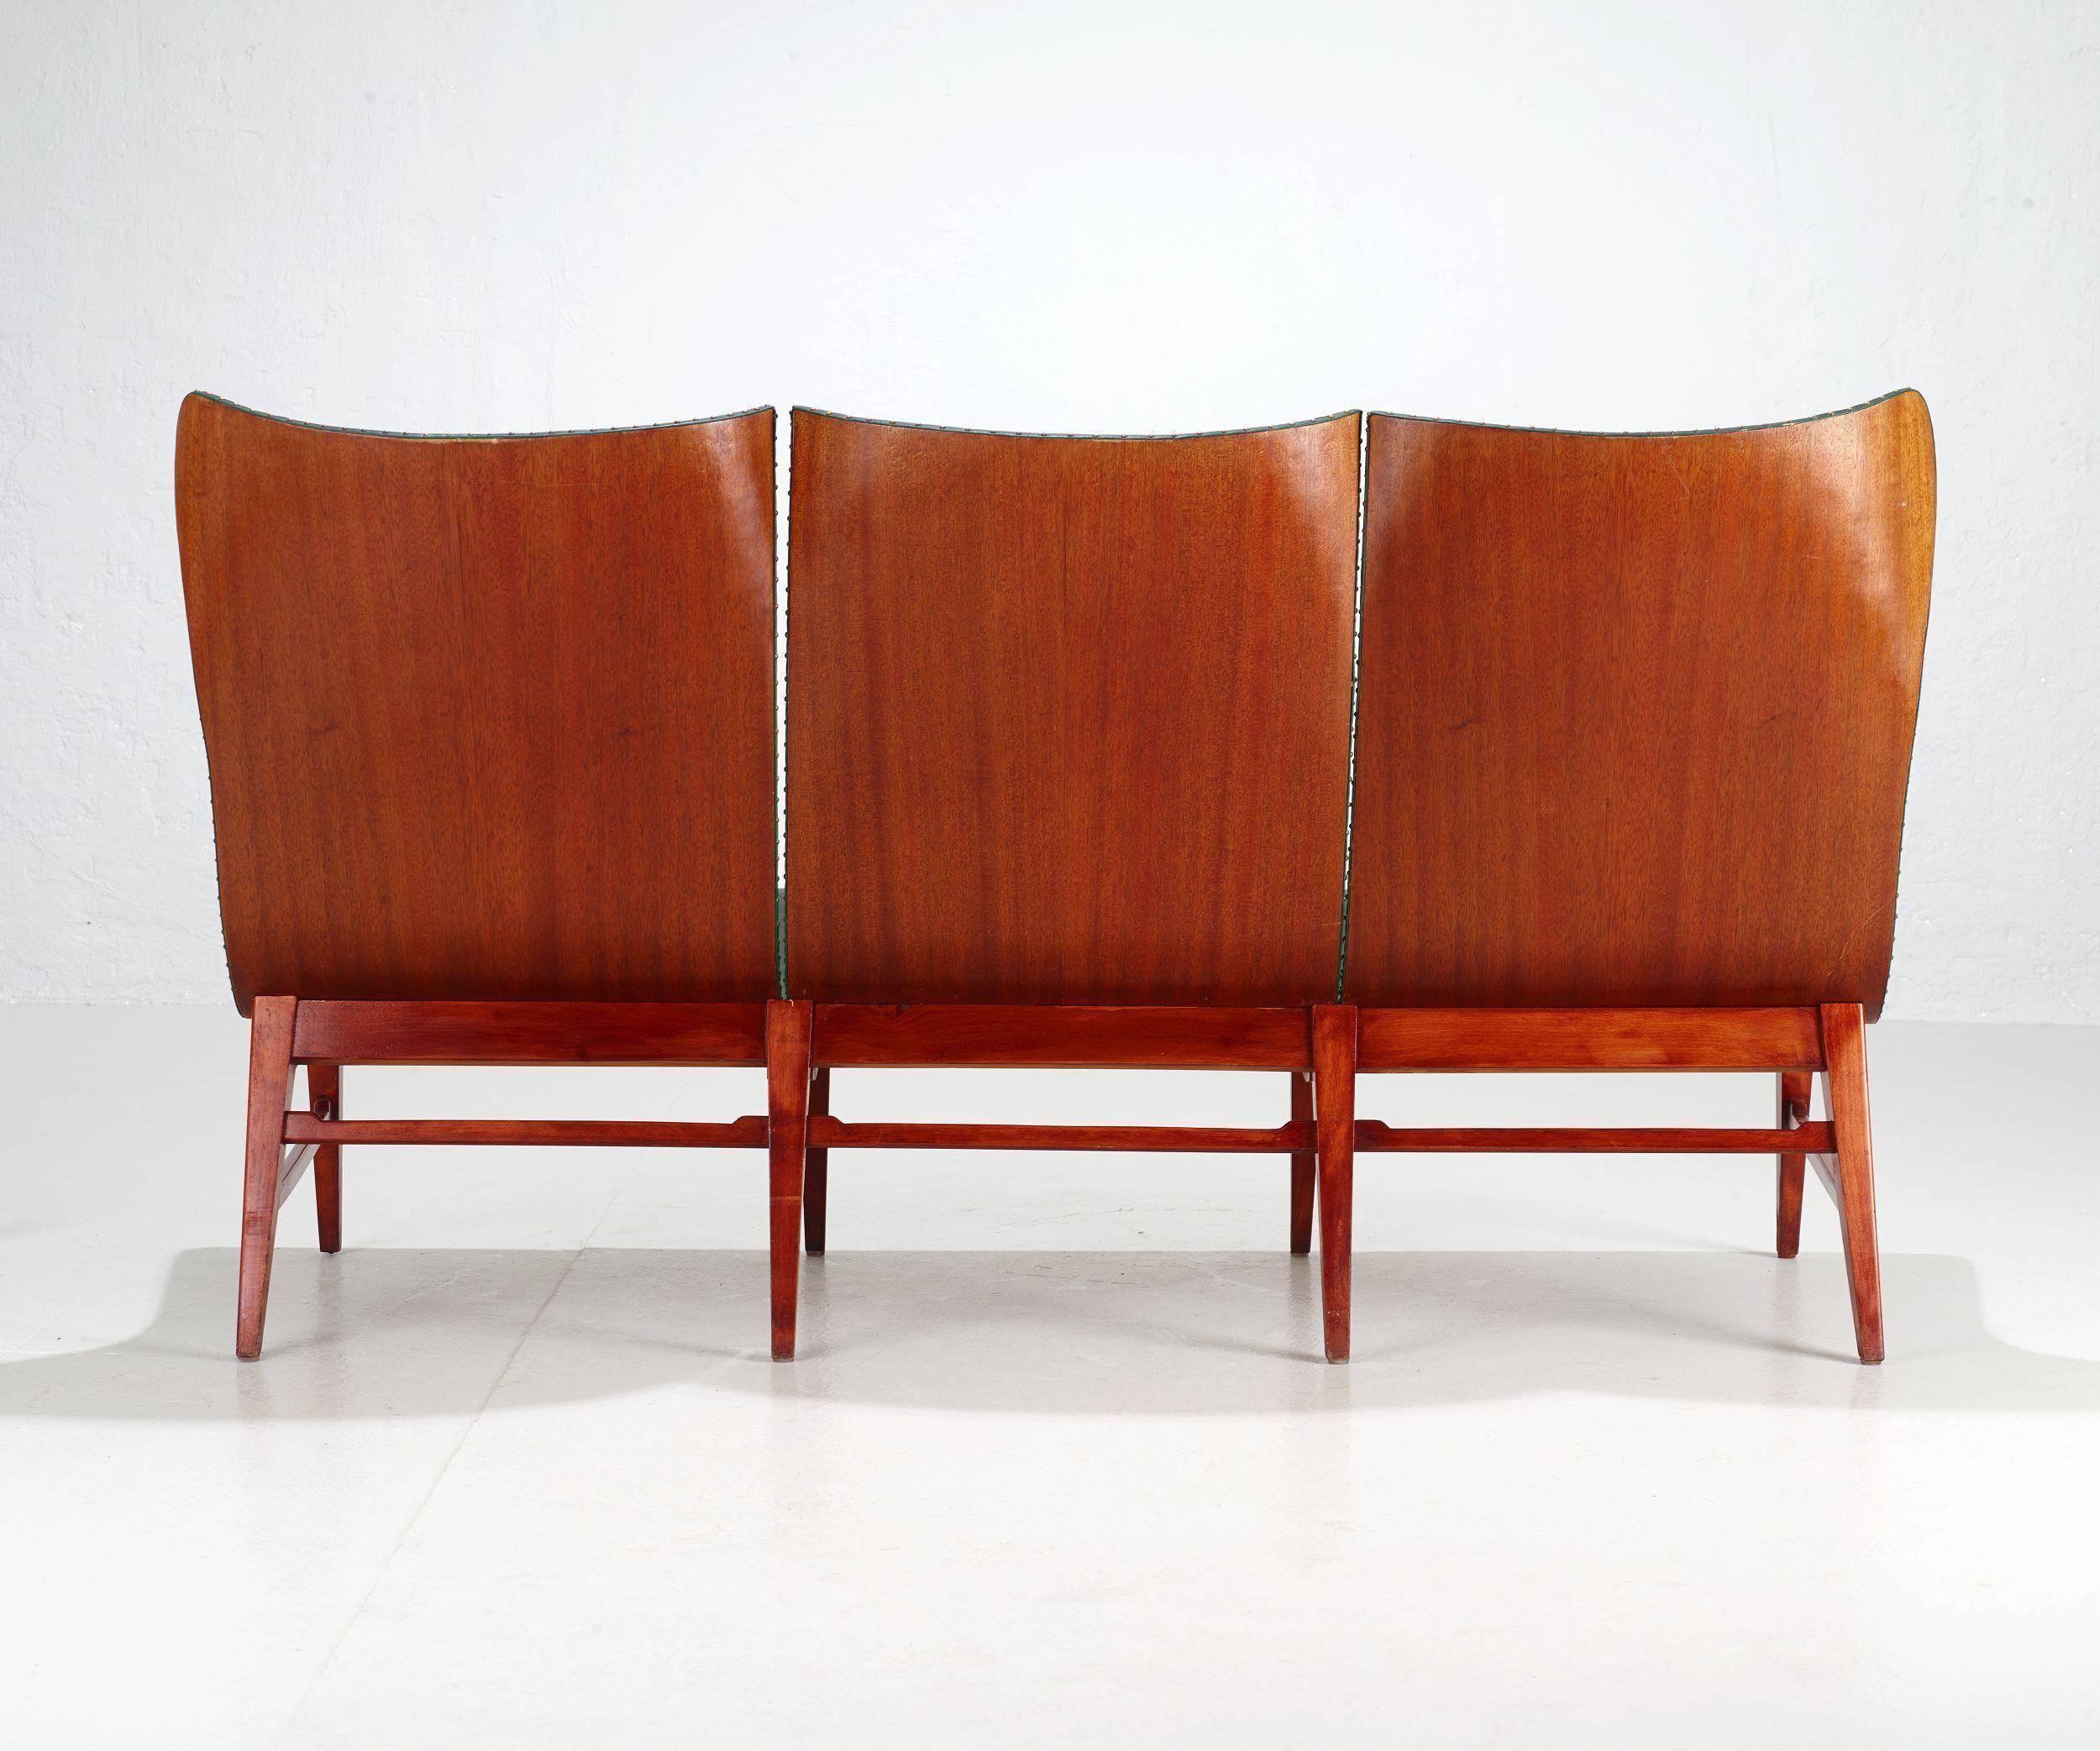 Mid-20th Century Mid-Century Modern Wing Back Bench by Axel Larsson for Bodafors, 1950's For Sale